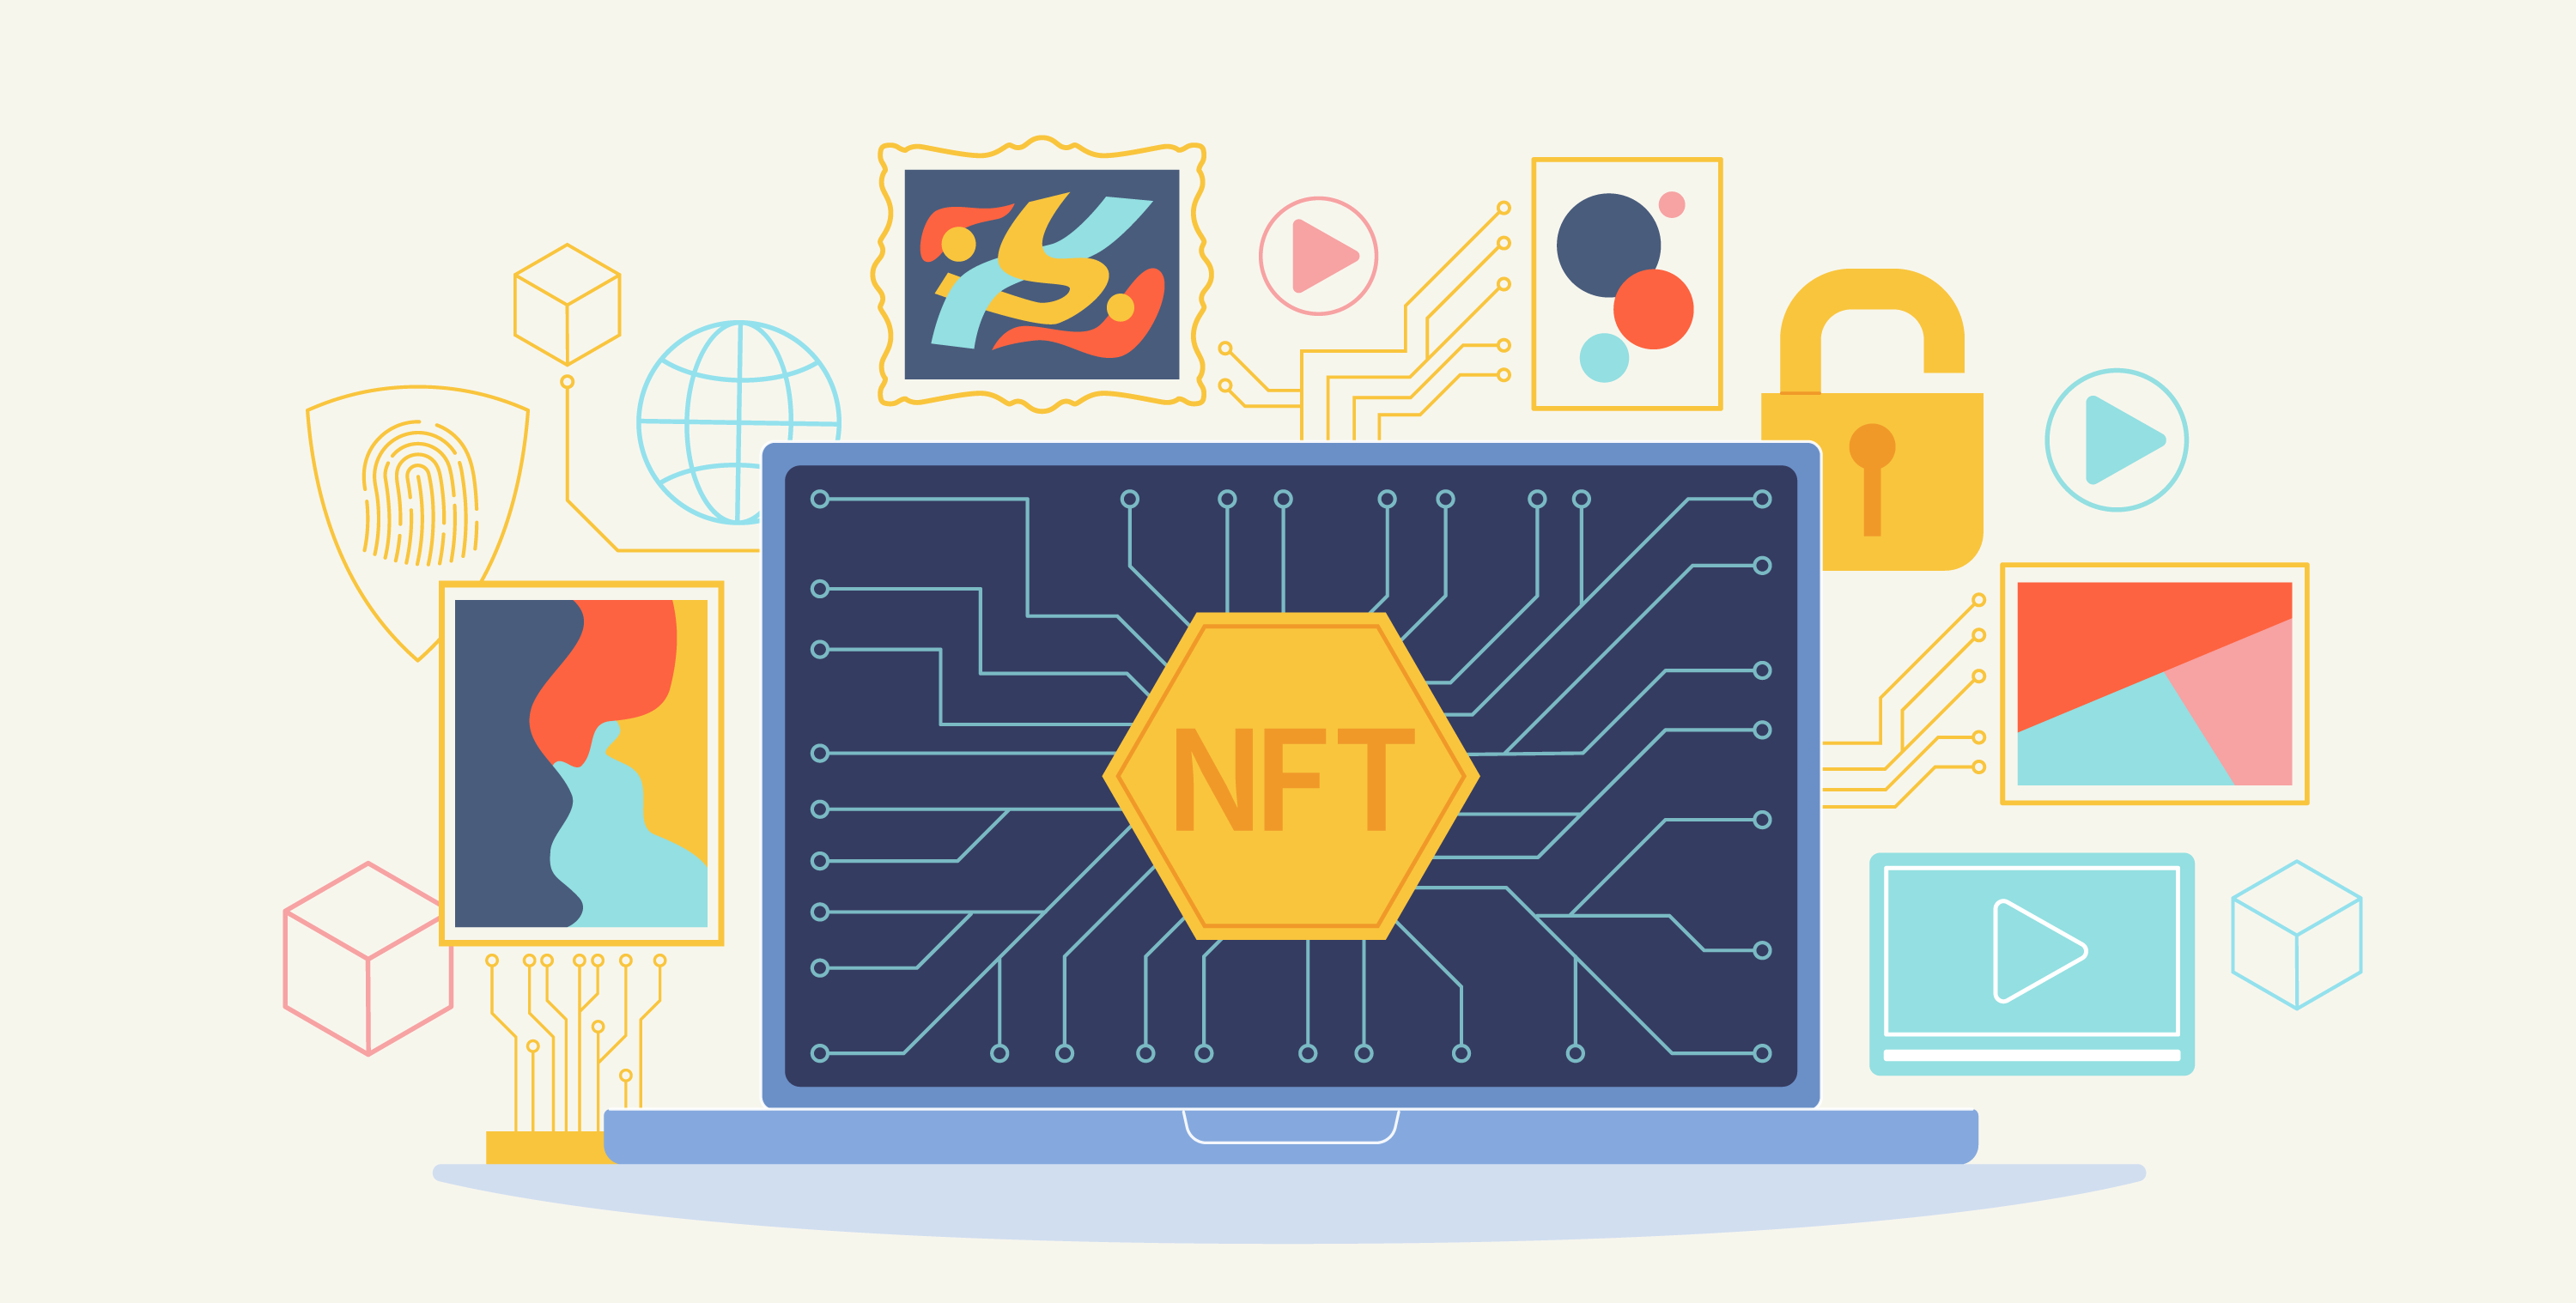 Trading domain names for NFTs probably won't work for most people